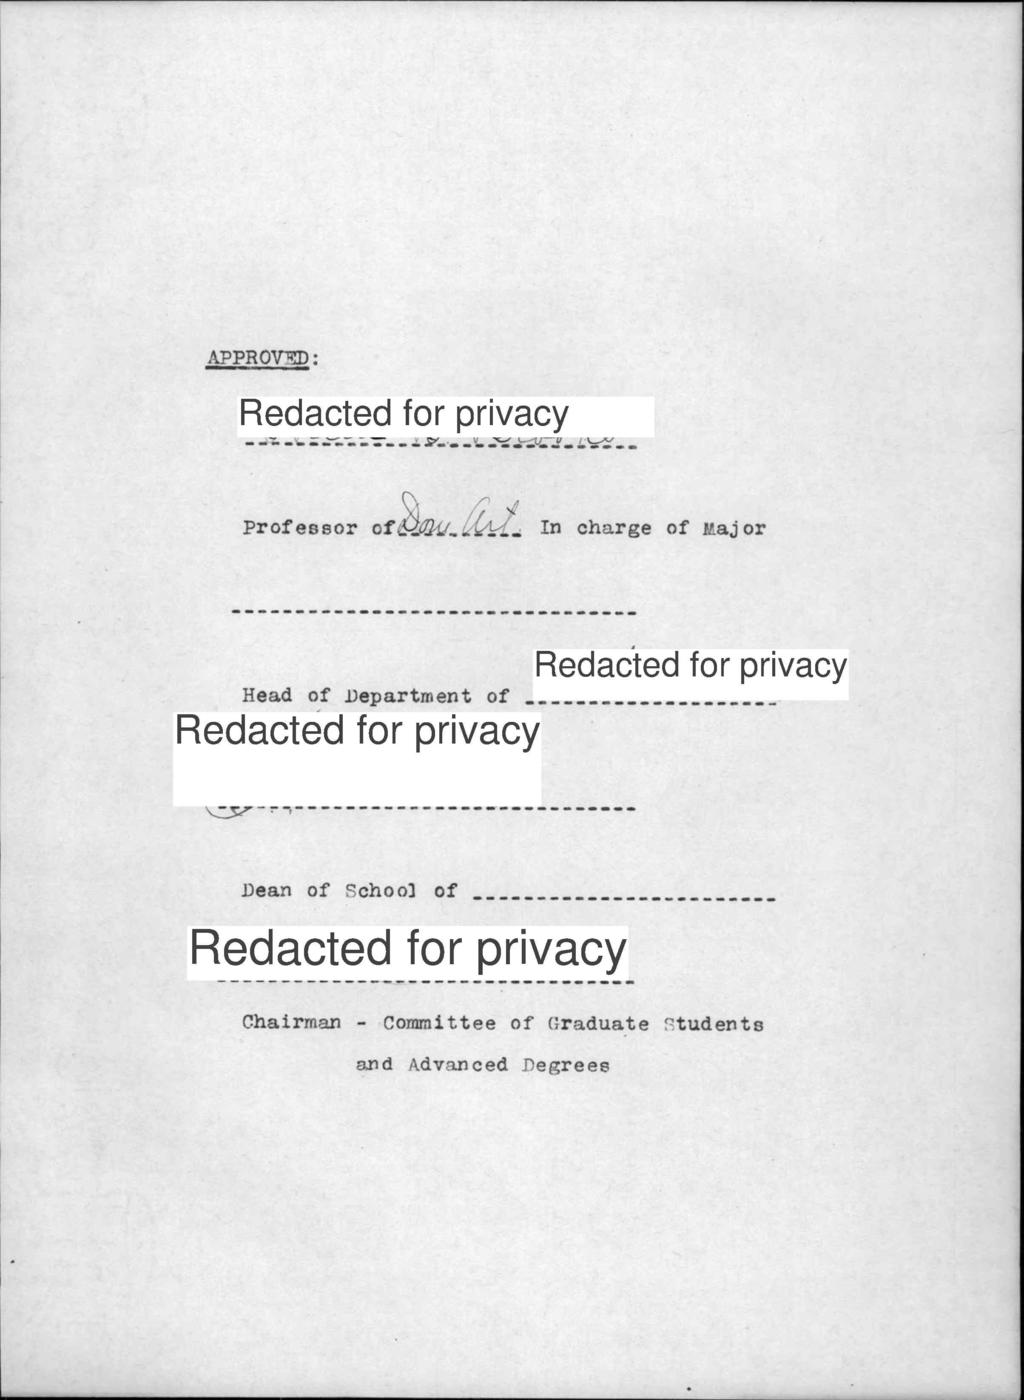 APPROVT: Redacted for privacy Professor In charge of Major Redacted for privacy Head of Bepartnert of Redactéd